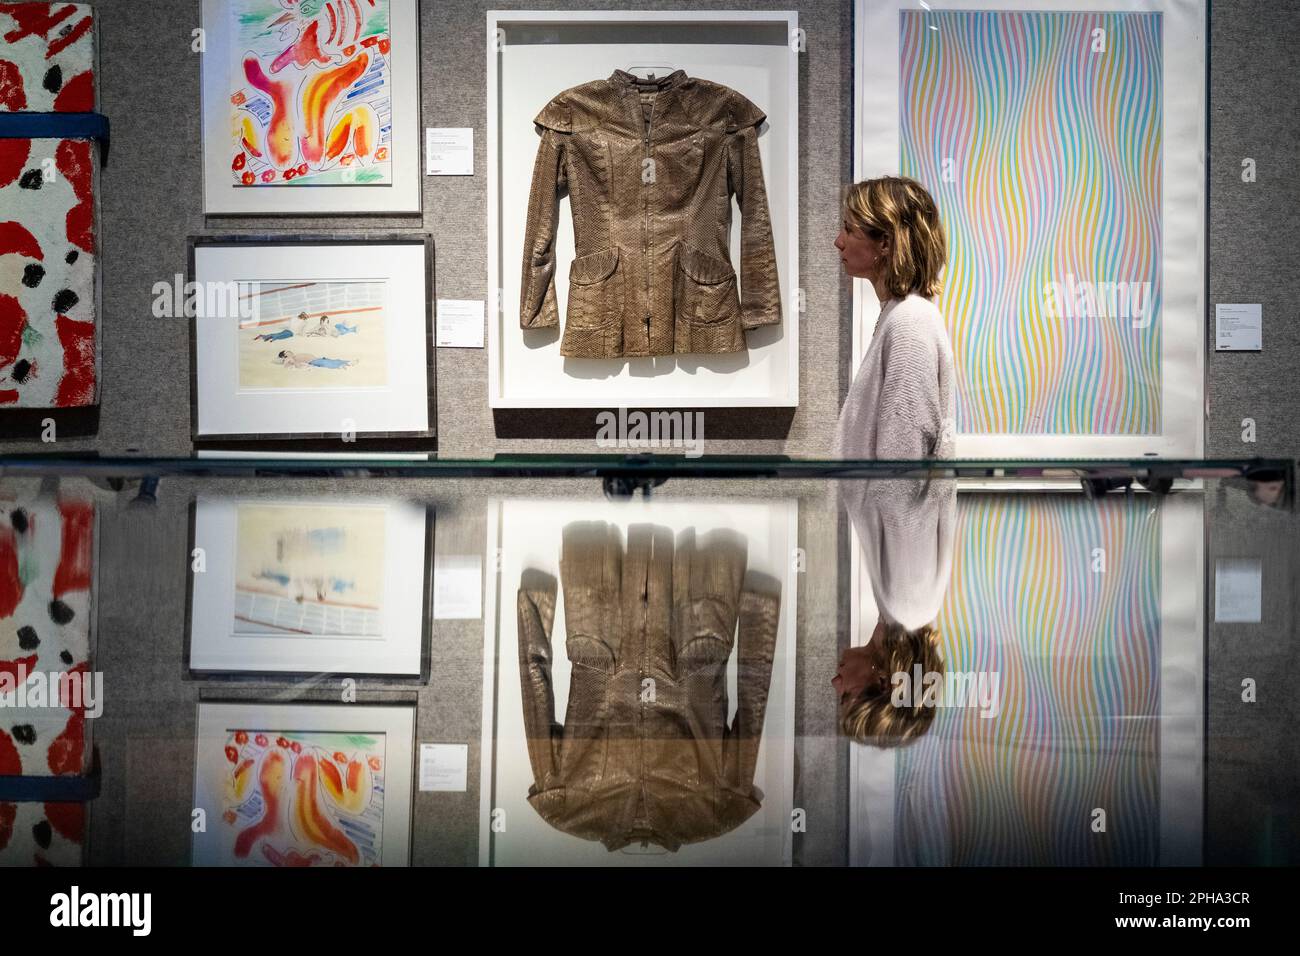 London, UK.  27 March 2023. A staff member views (C) “Framed Python Skin Jacket”, circa 1966, by Ossie Clark (Est. £600 - £800) at a preview of Bonham’s ‘British. Cool.’ sale.  British art, prints, fashion, photographs and popular culture memorabilia will be offered for sale at Bonham’s New Bond Street galleries on 29 March  Credit: Stephen Chung / Alamy Live News Stock Photo